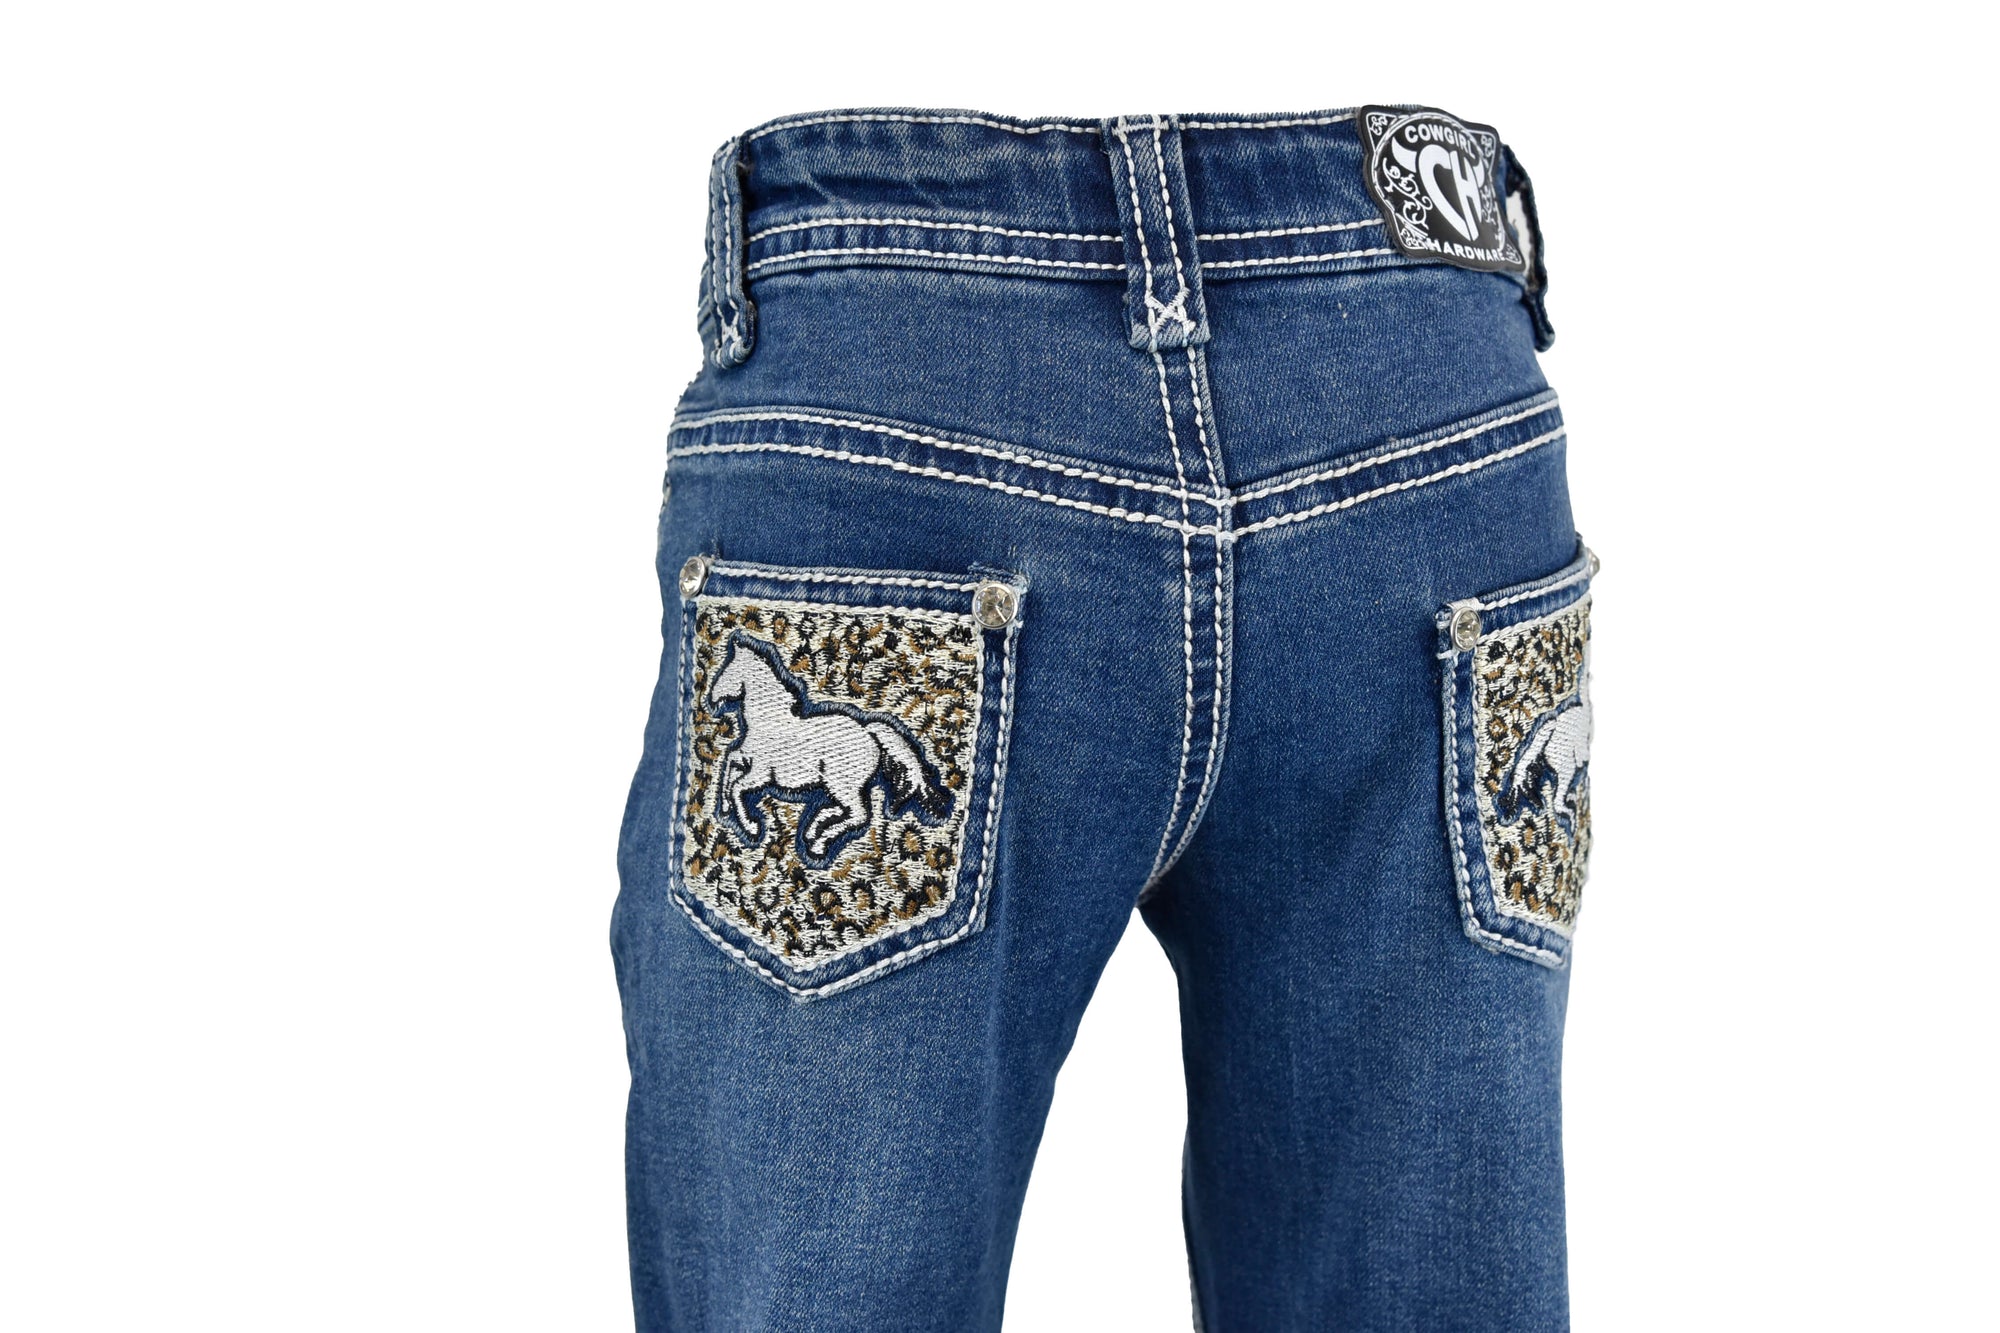 Toddler Leopard Horse Jeans from Cowgirl Hardware